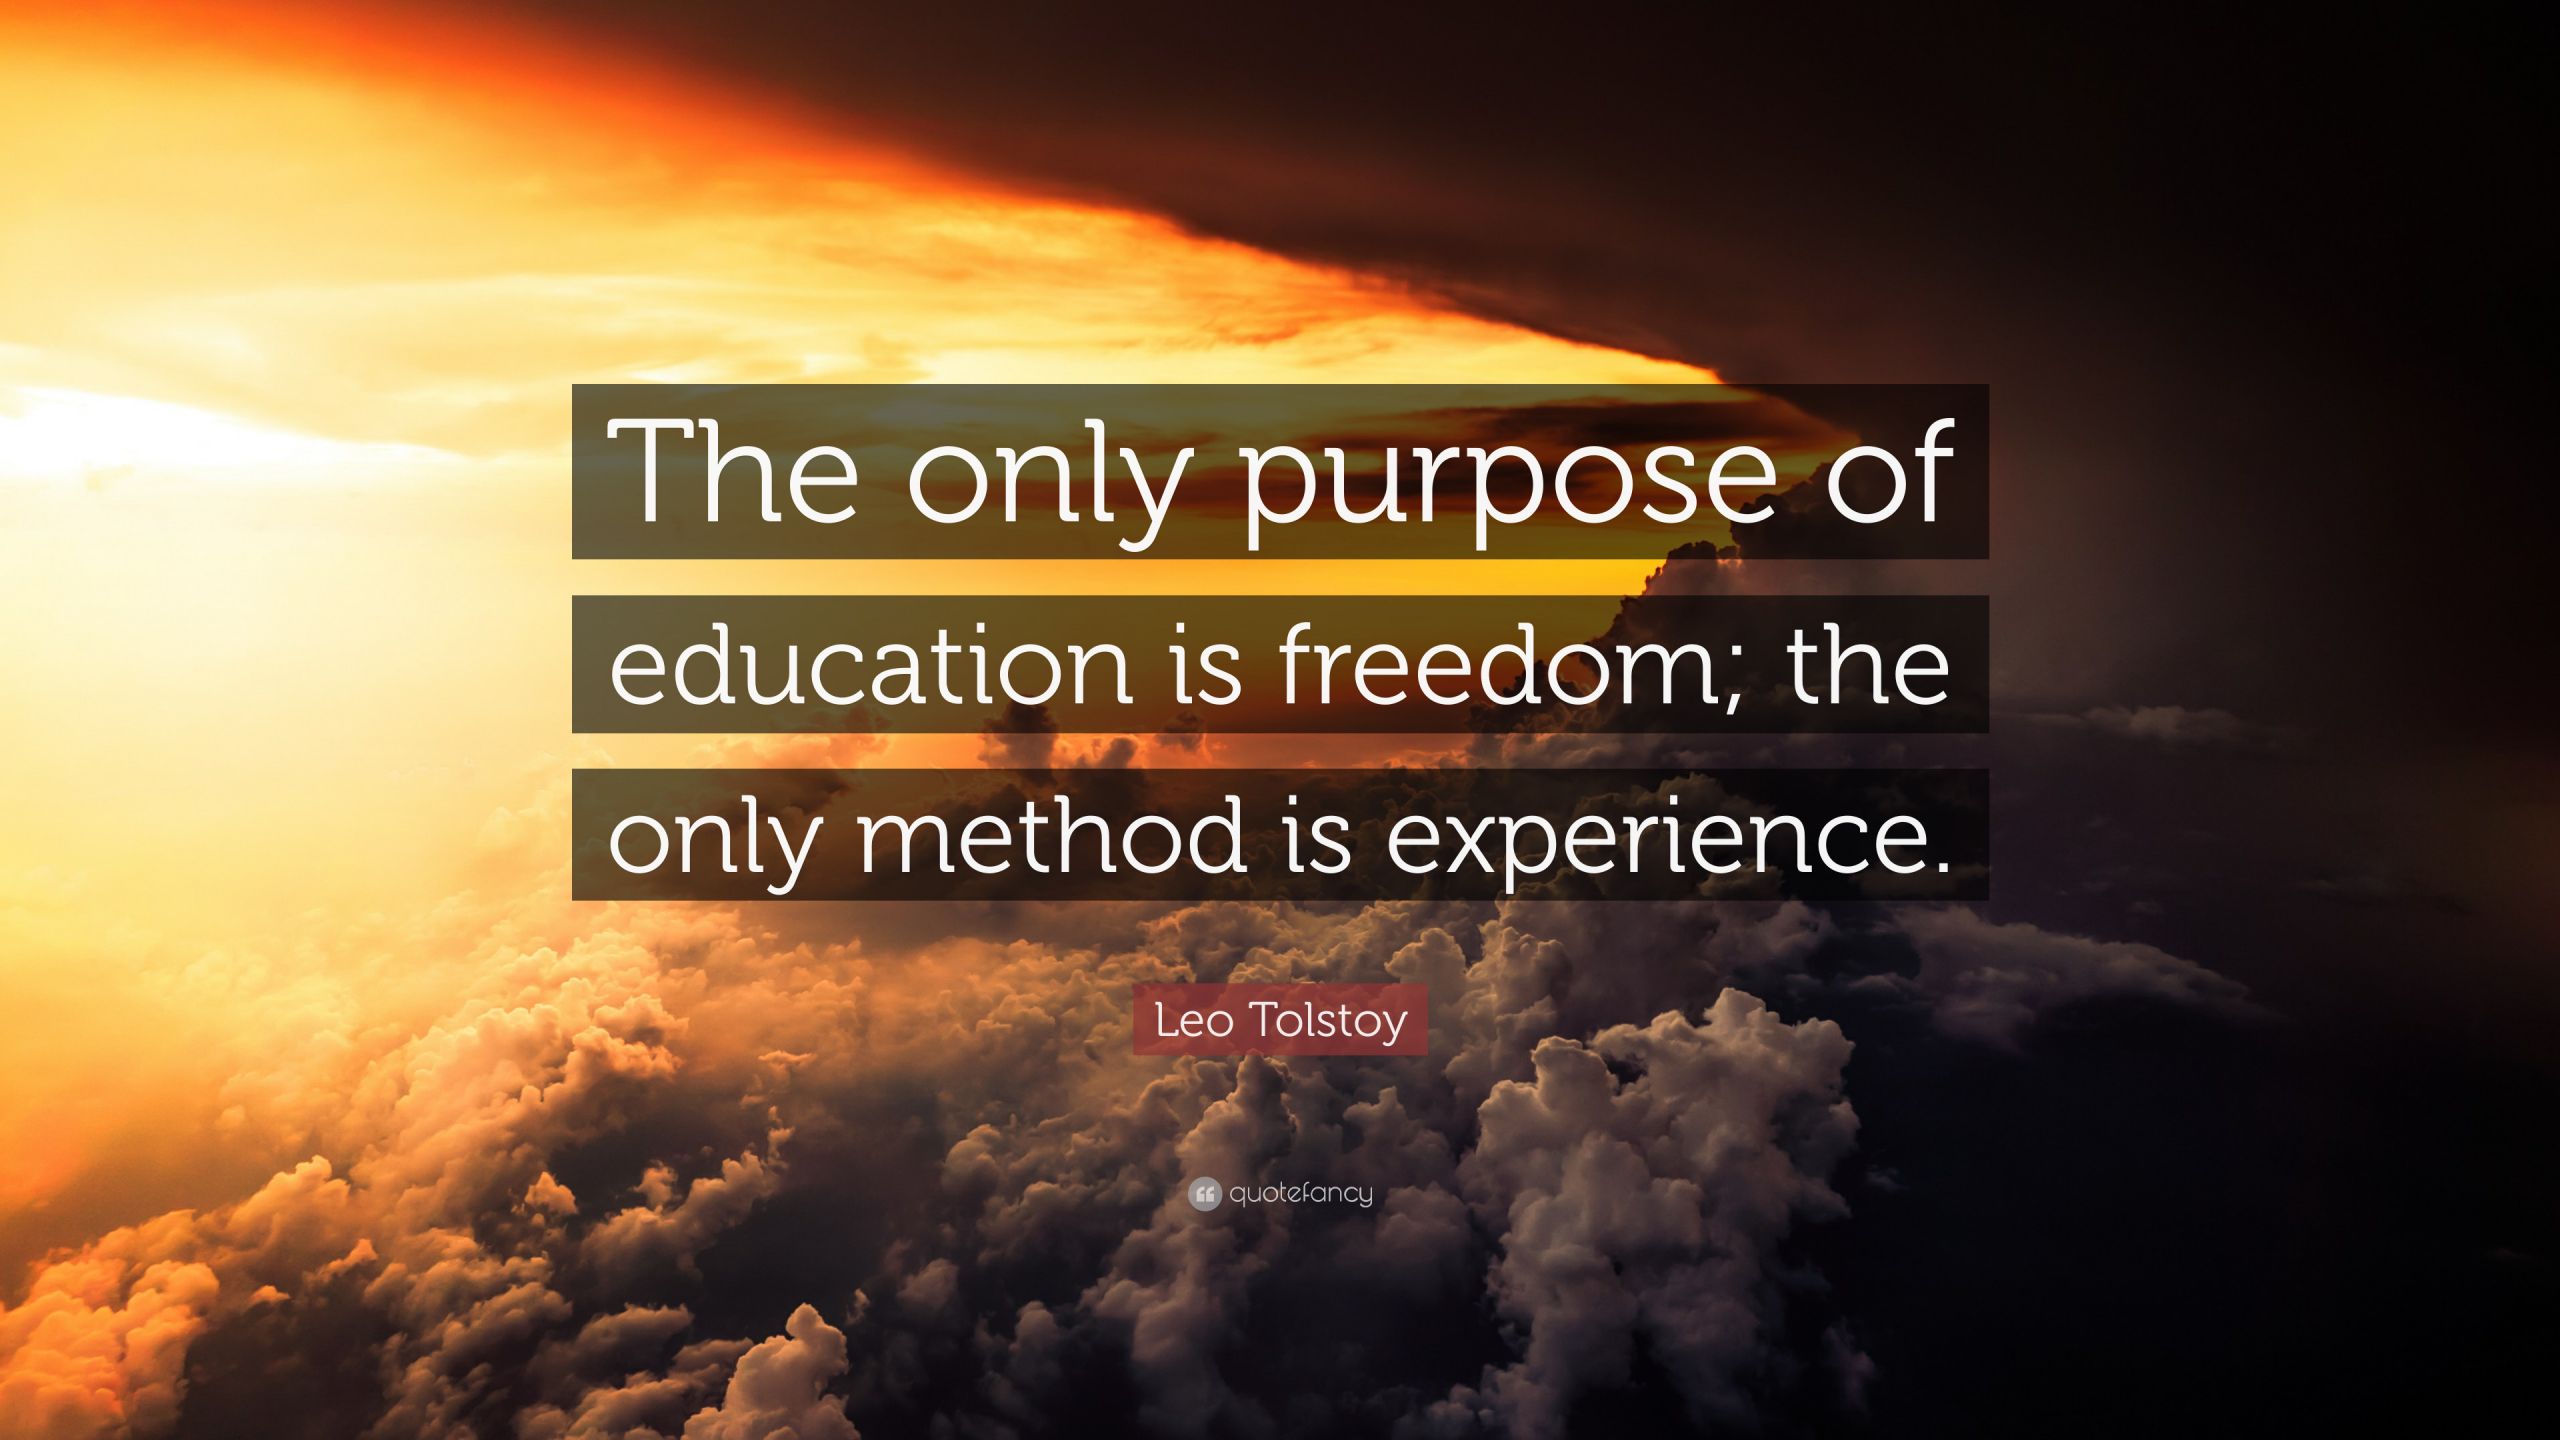 Purpose Of Education Quote
 Leo Tolstoy Quote “The only purpose of education is